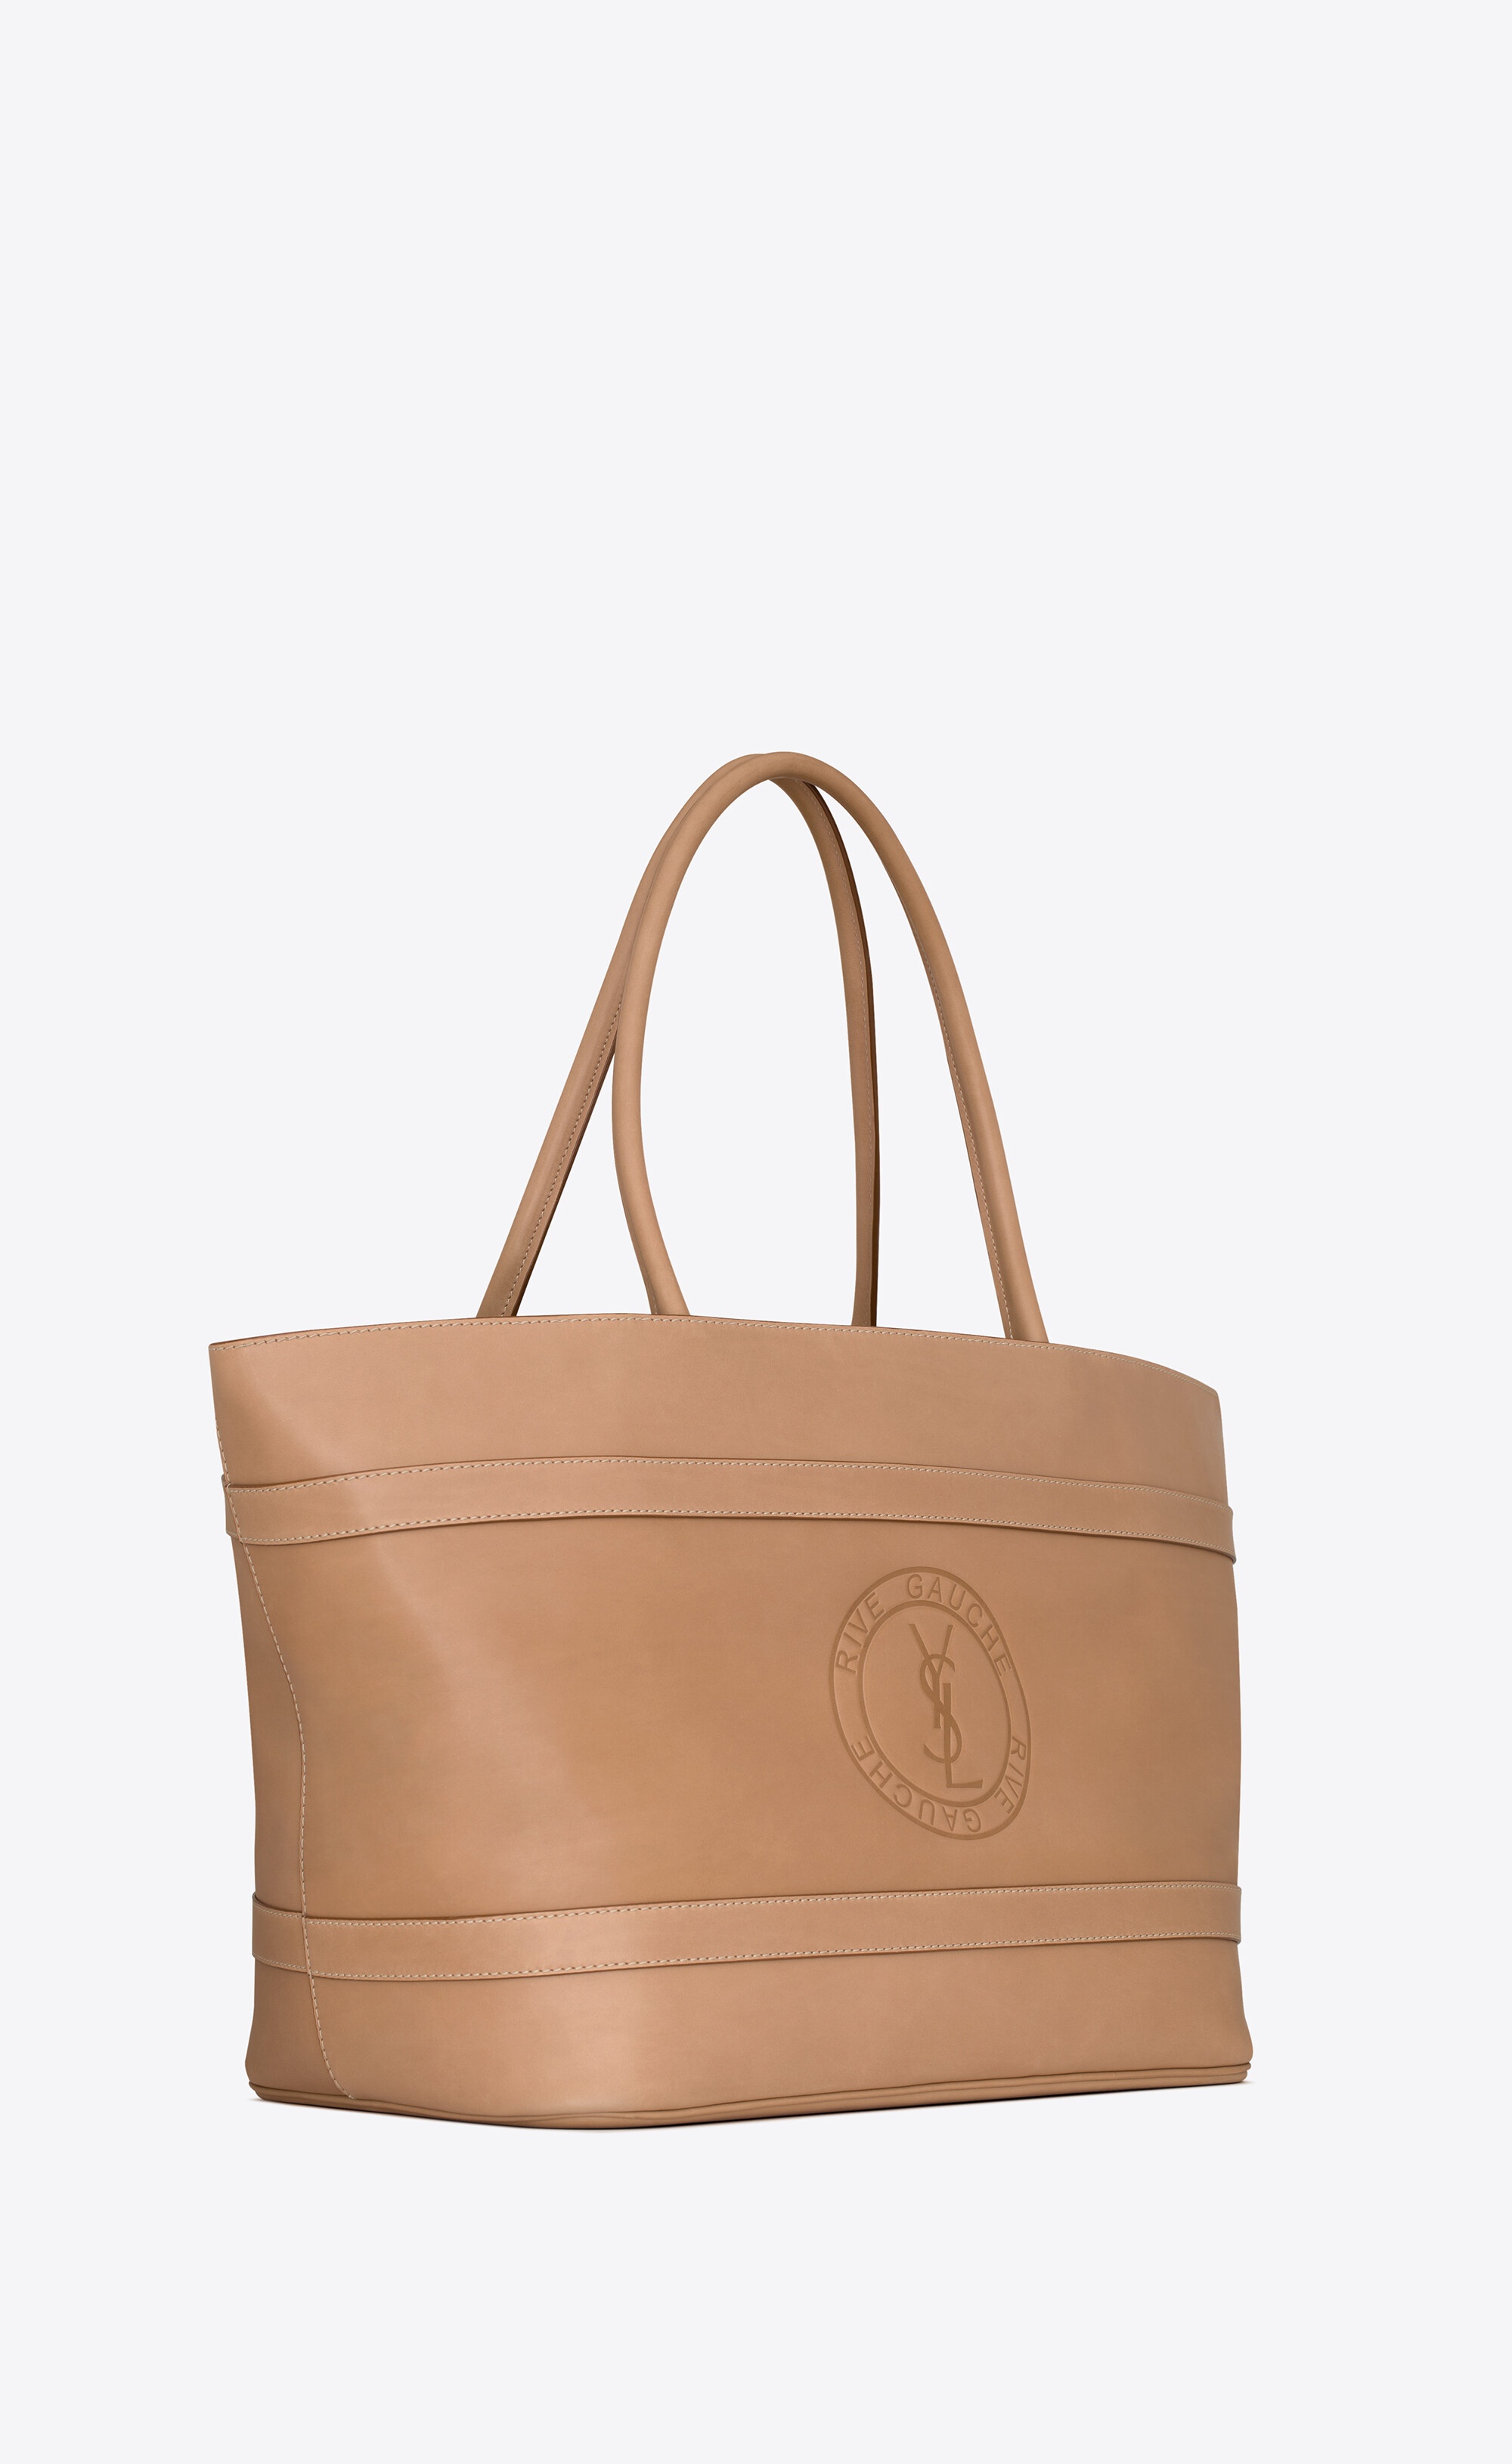 rive gauche tote bag in vegetable-tanned leather - 5